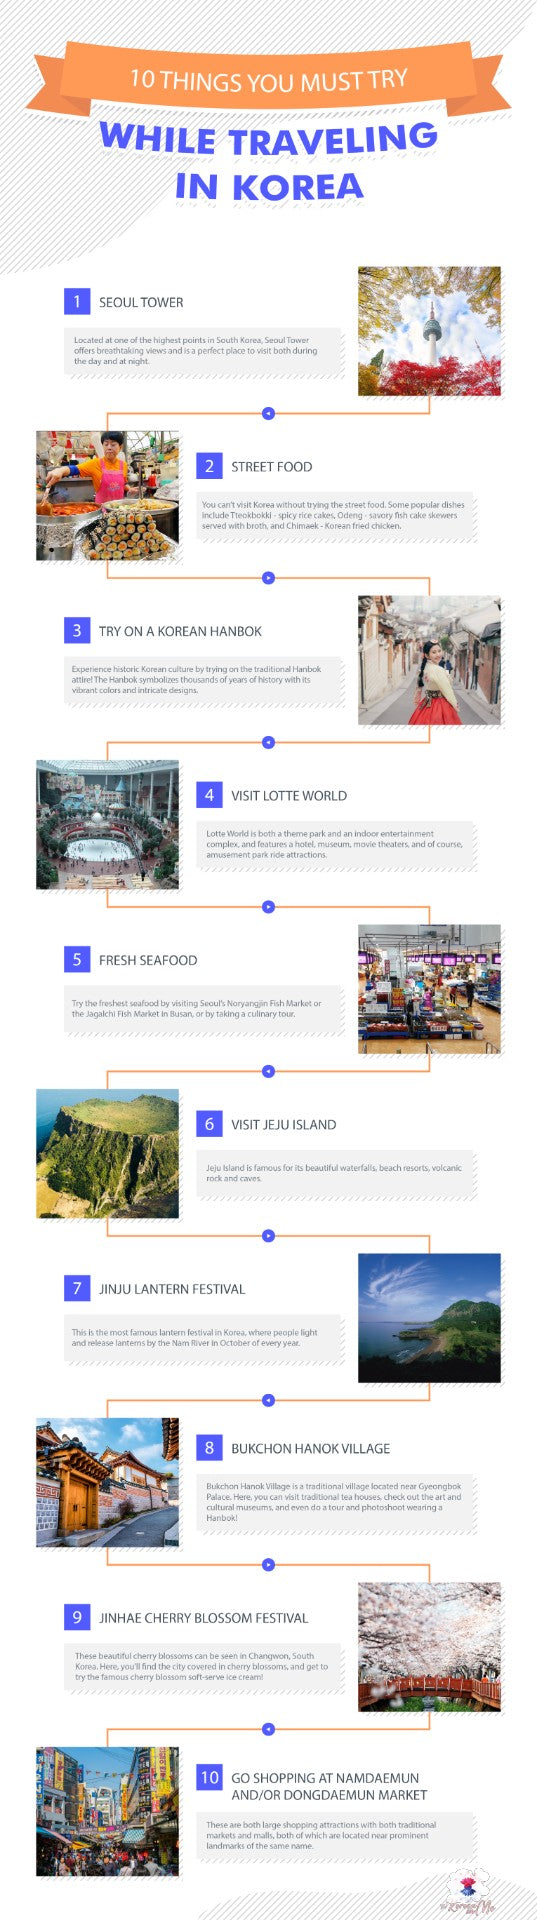 Infographic on 10 Things You Must Try While Traveling in Korea